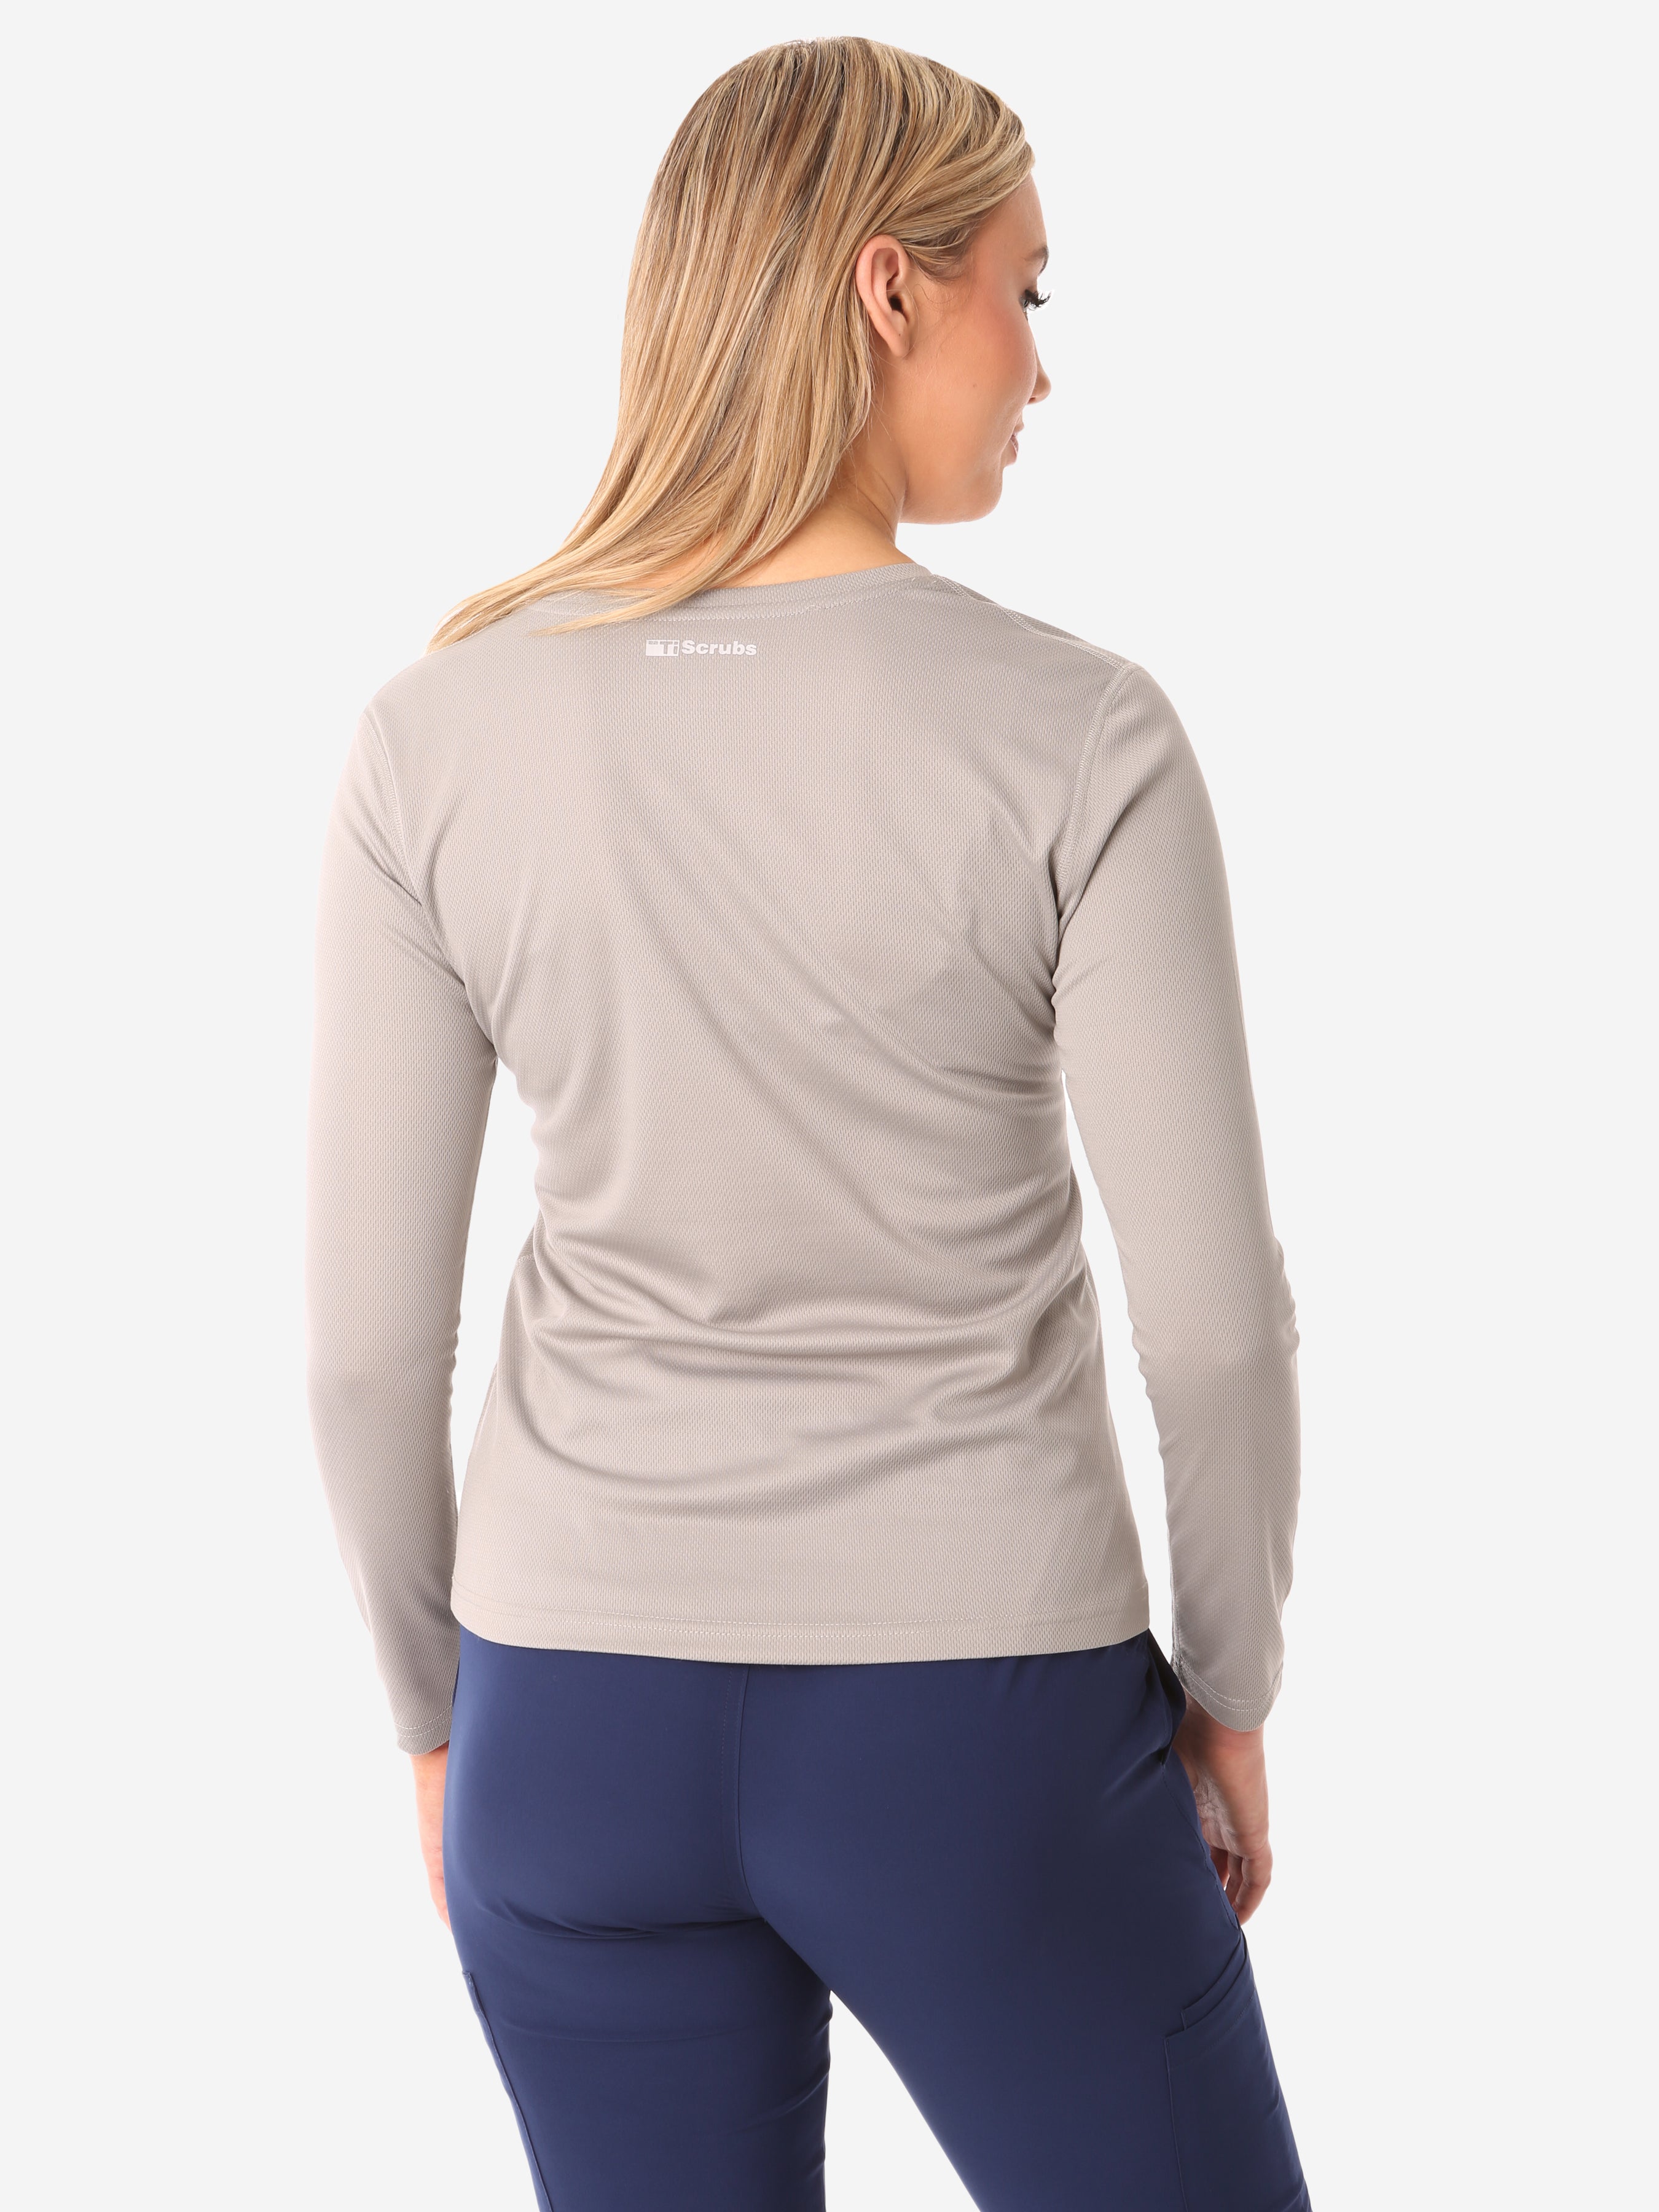 Buy Core Long-Sleeve Tee, Fast Delivery